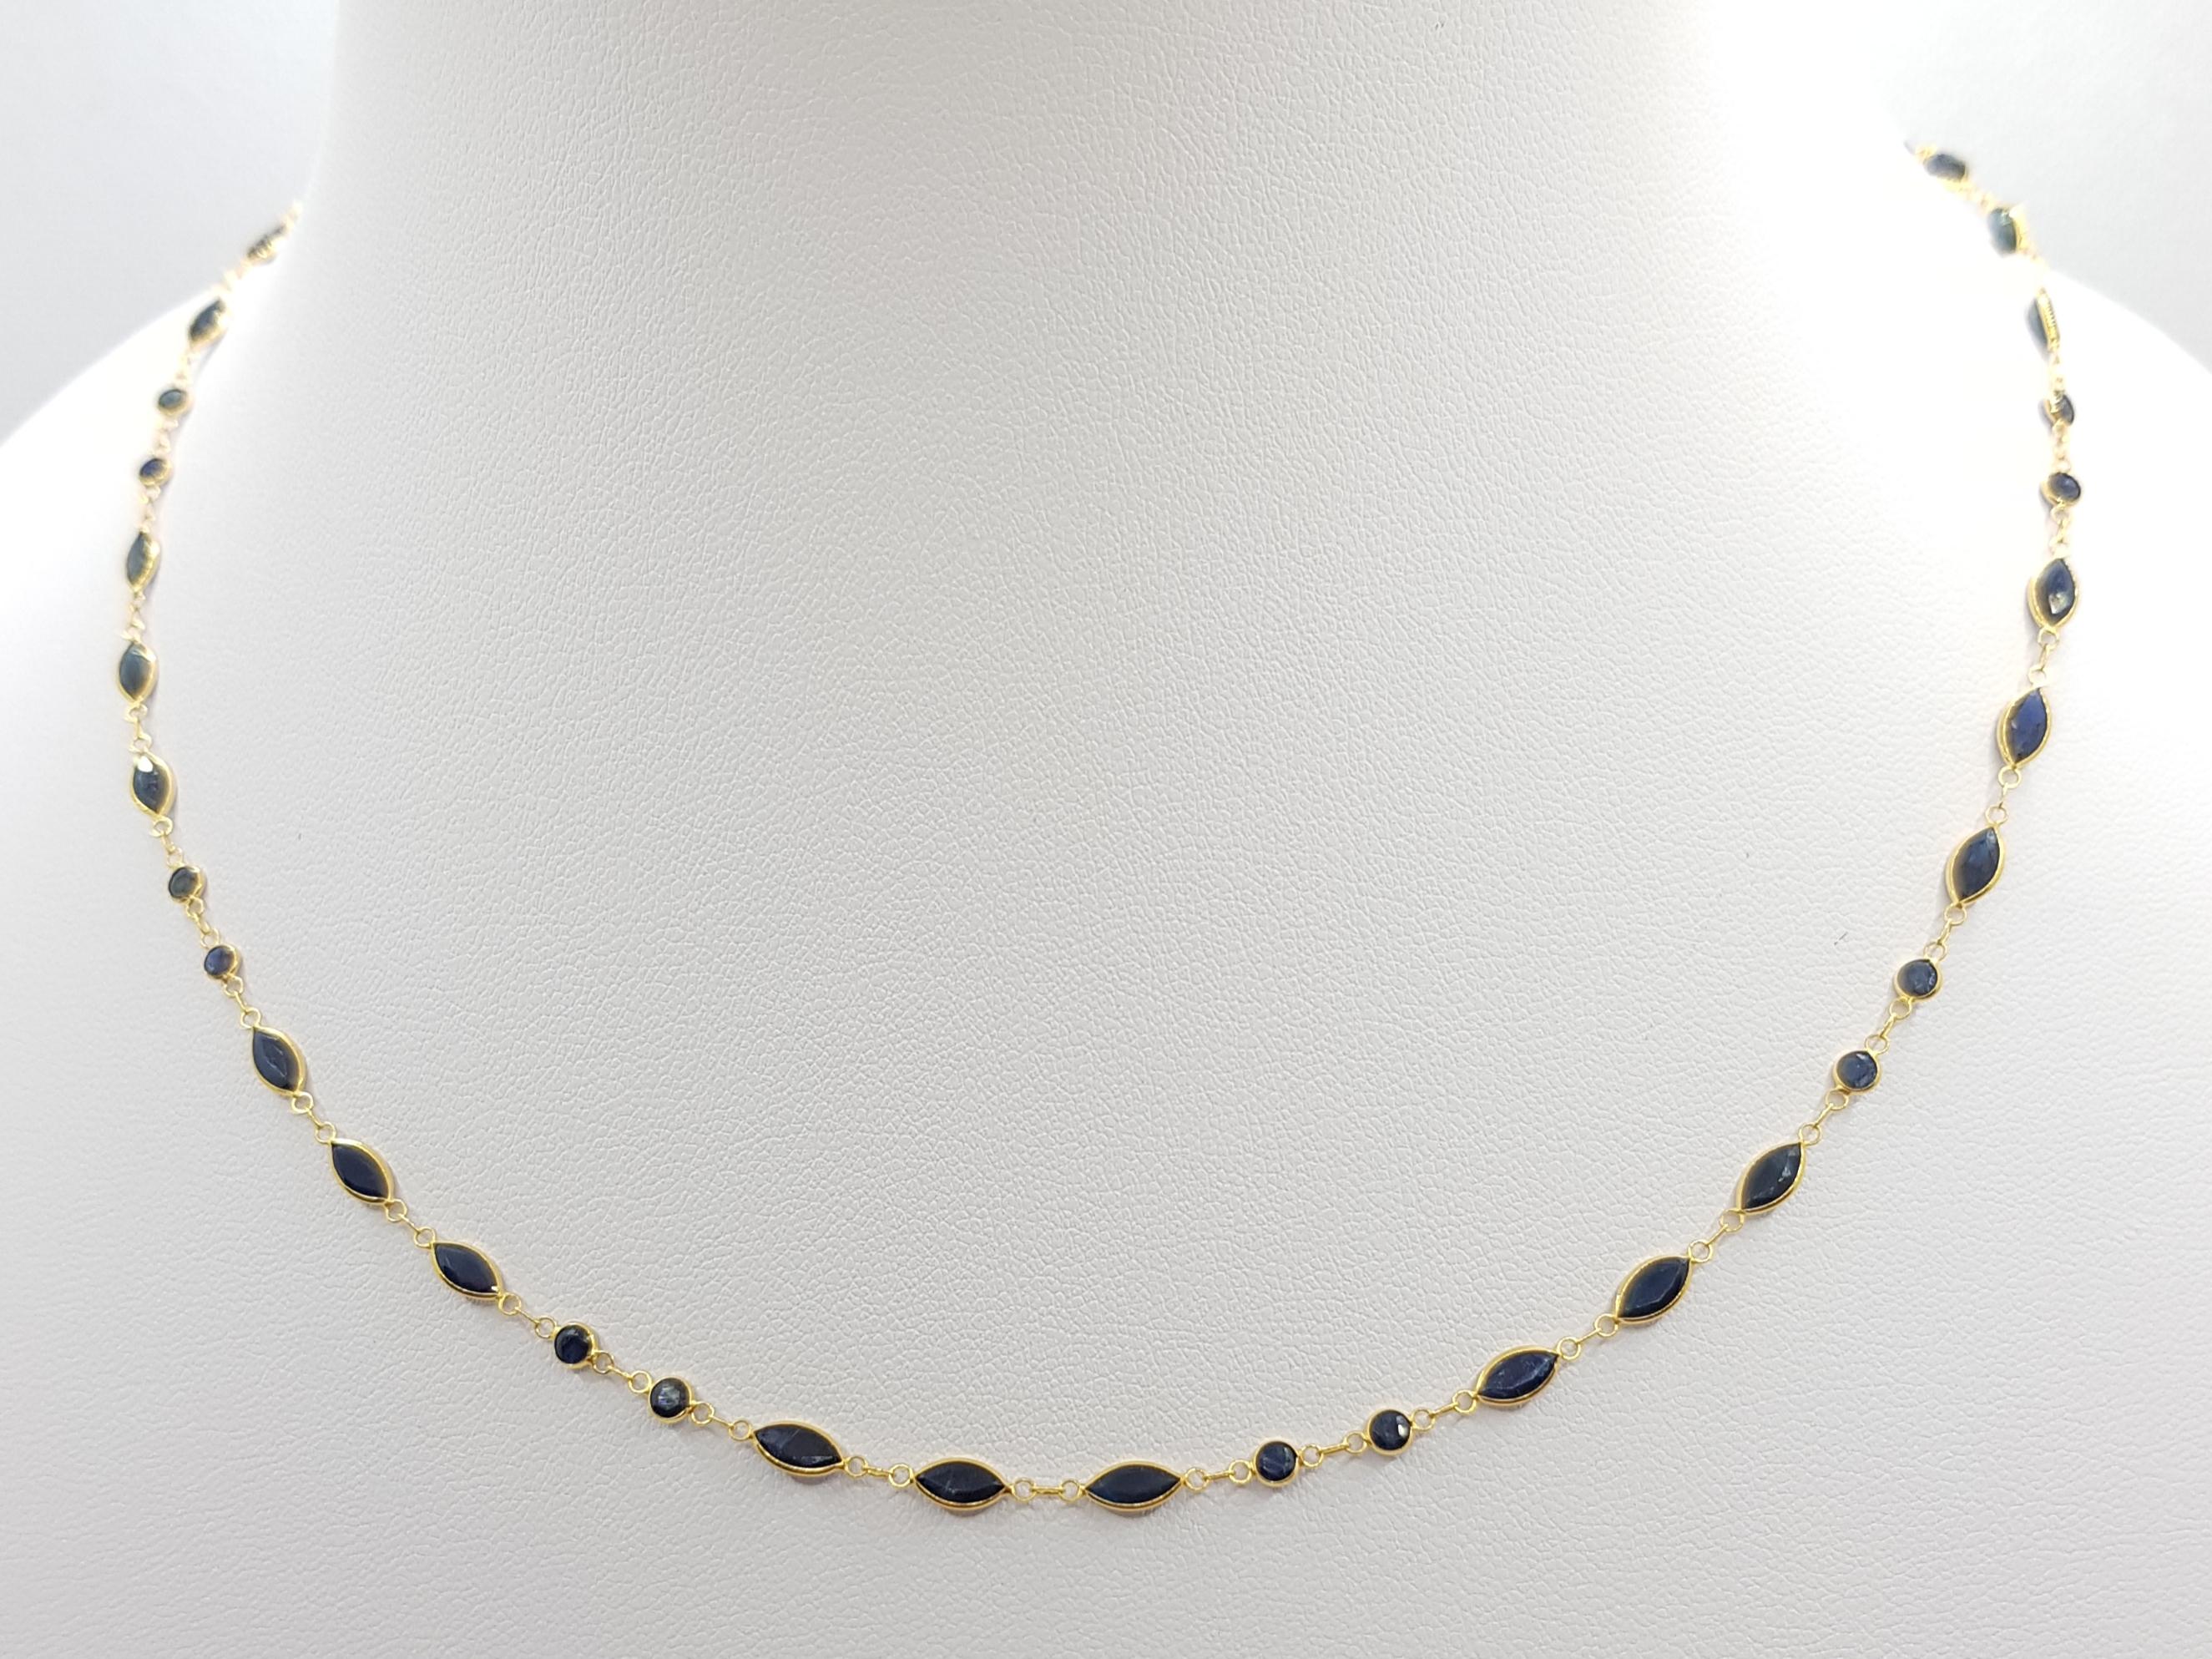 Blue Sapphire 9.73 carats Necklace set in 18 Karat Gold Settings

Width:  0.3 cm 
Length: 47.5 cm
Total Weight: 3.68 grams

